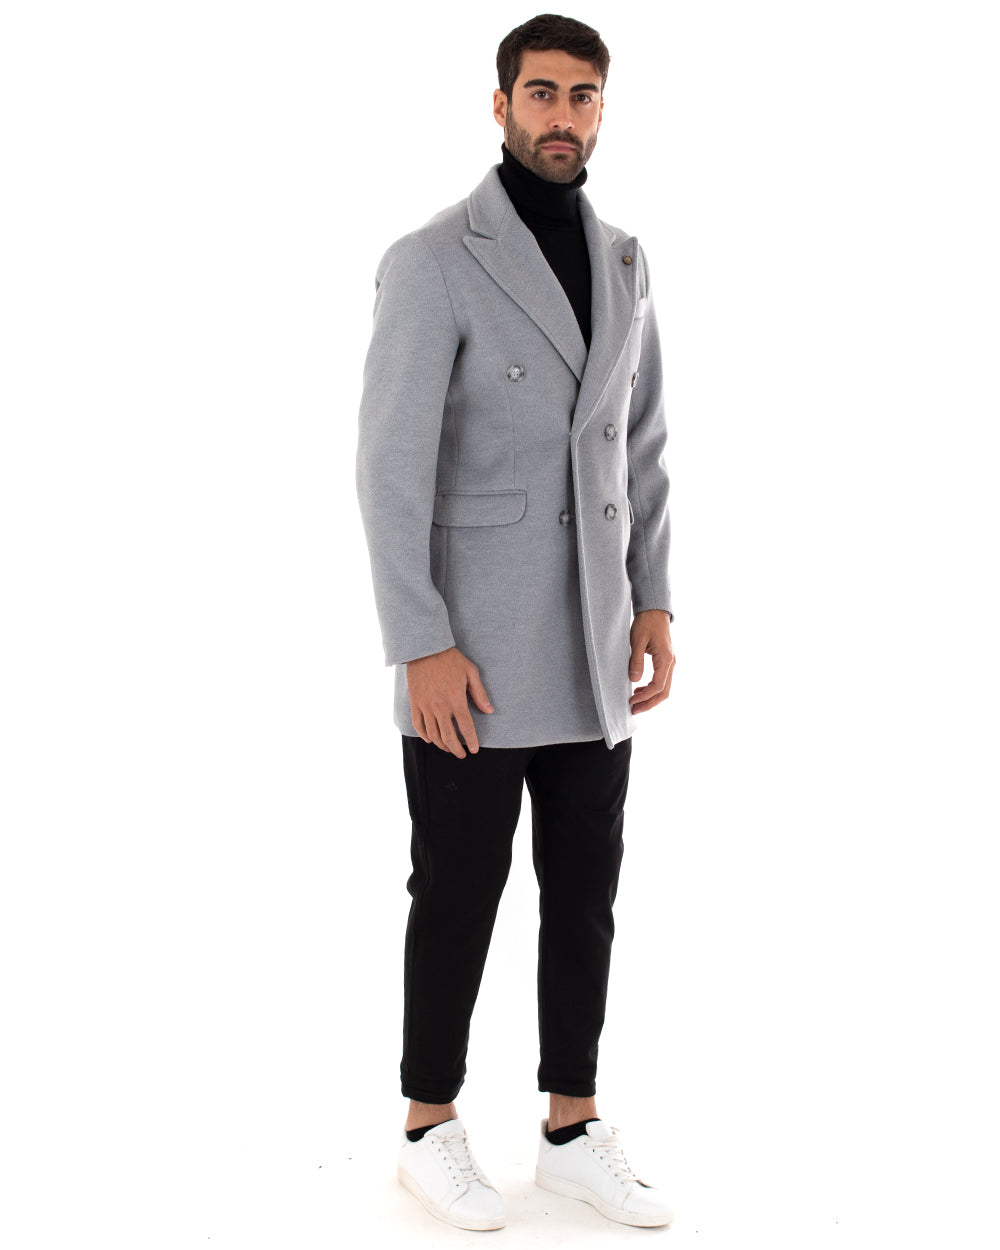 Double-breasted Men's Coat Jacket With Elegant Gray Collar GIOSAL-G2759A